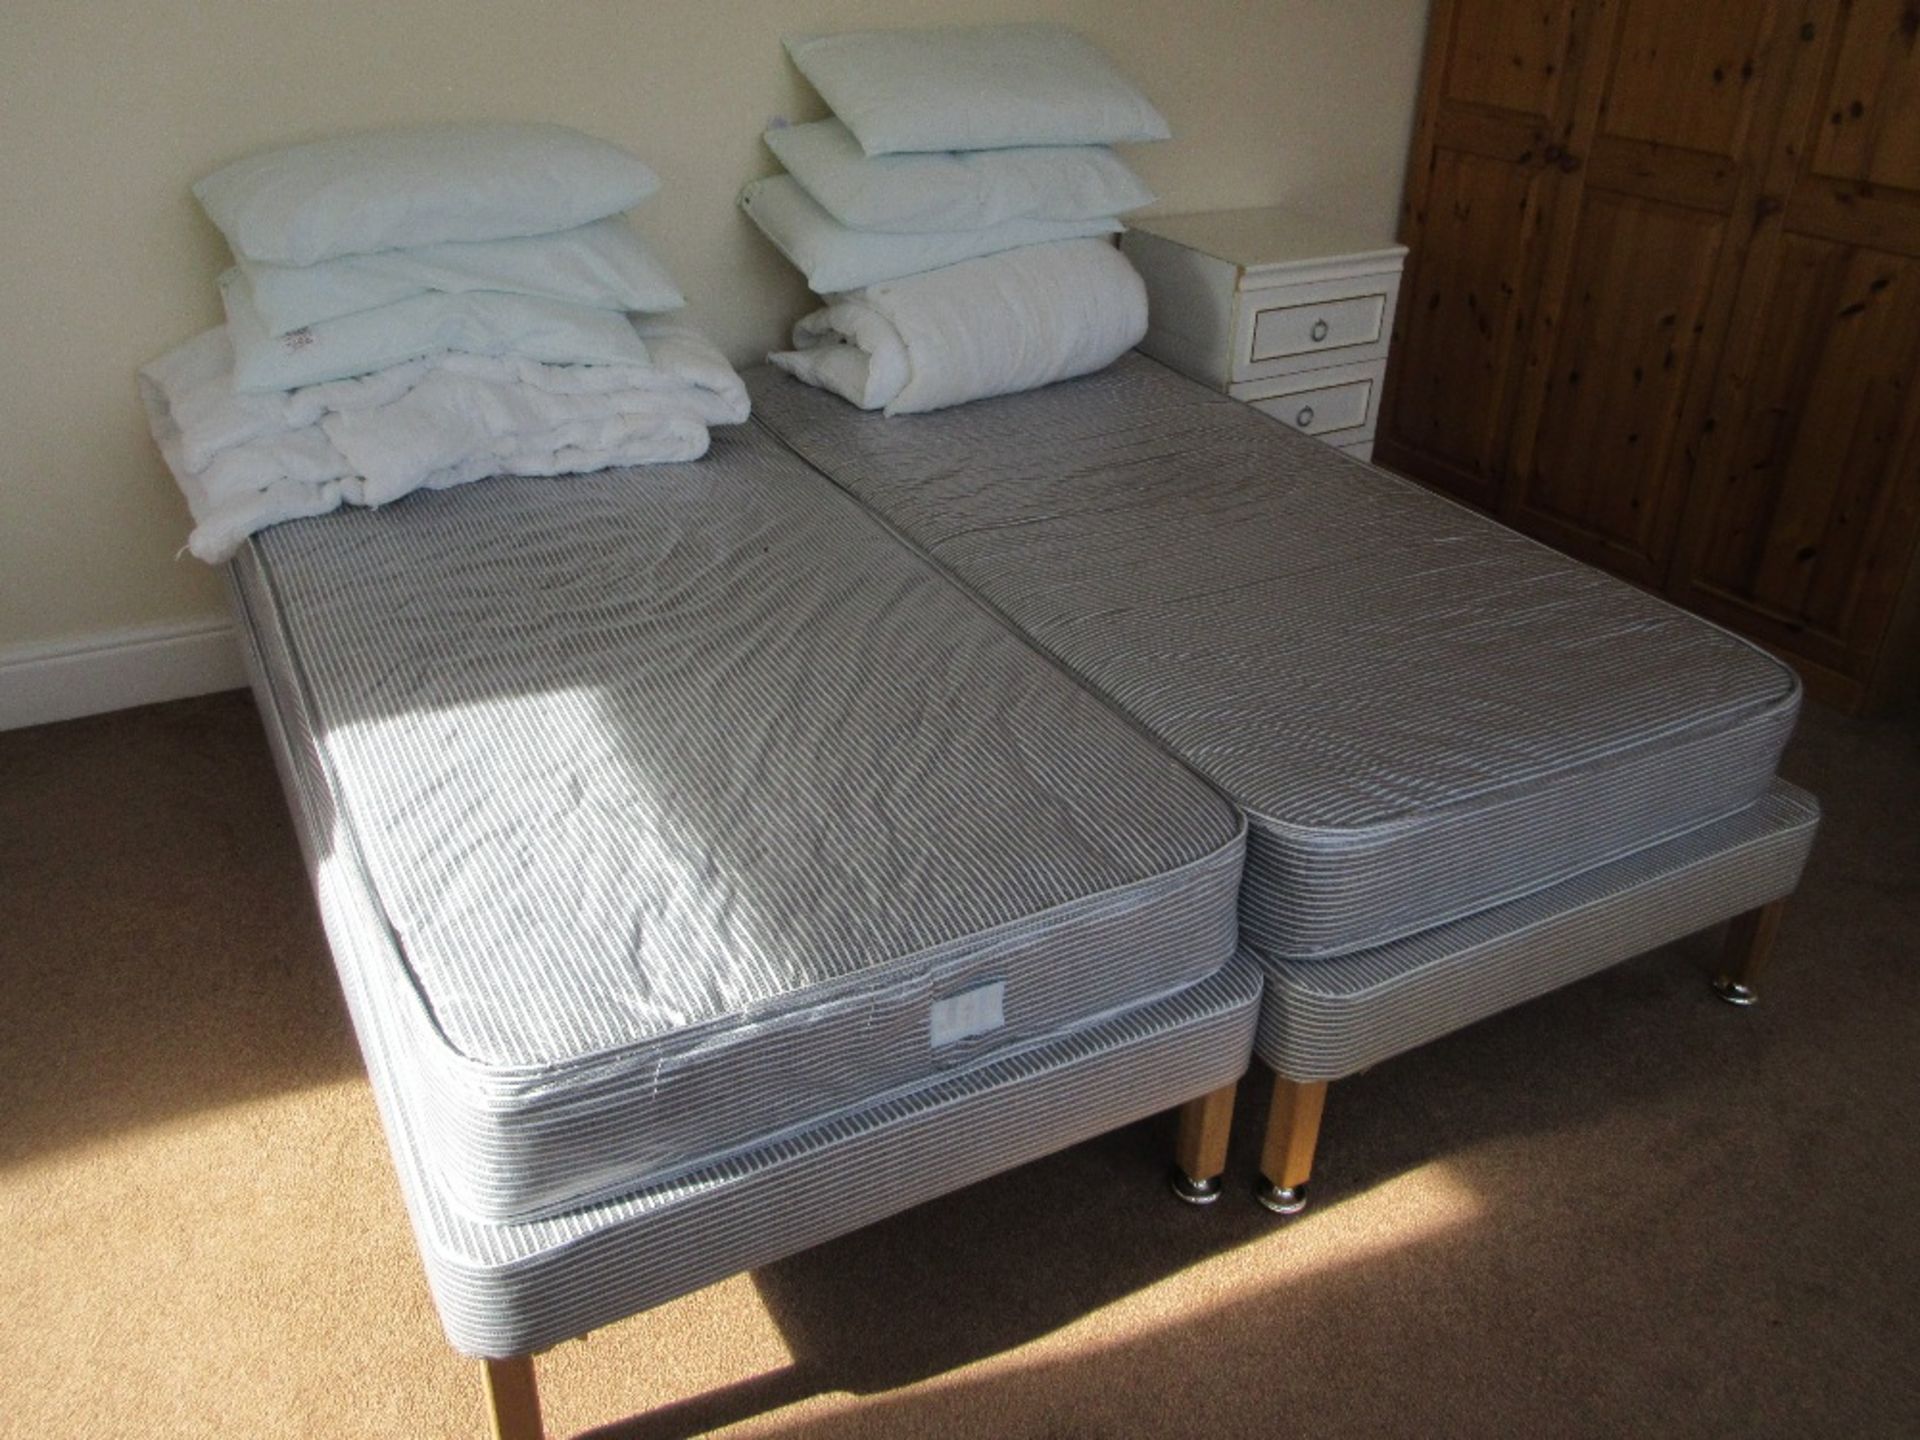 Contents of Room 19 to include: 2 bed base and mattress, 2 commodes, bedside table with 1 drawer,